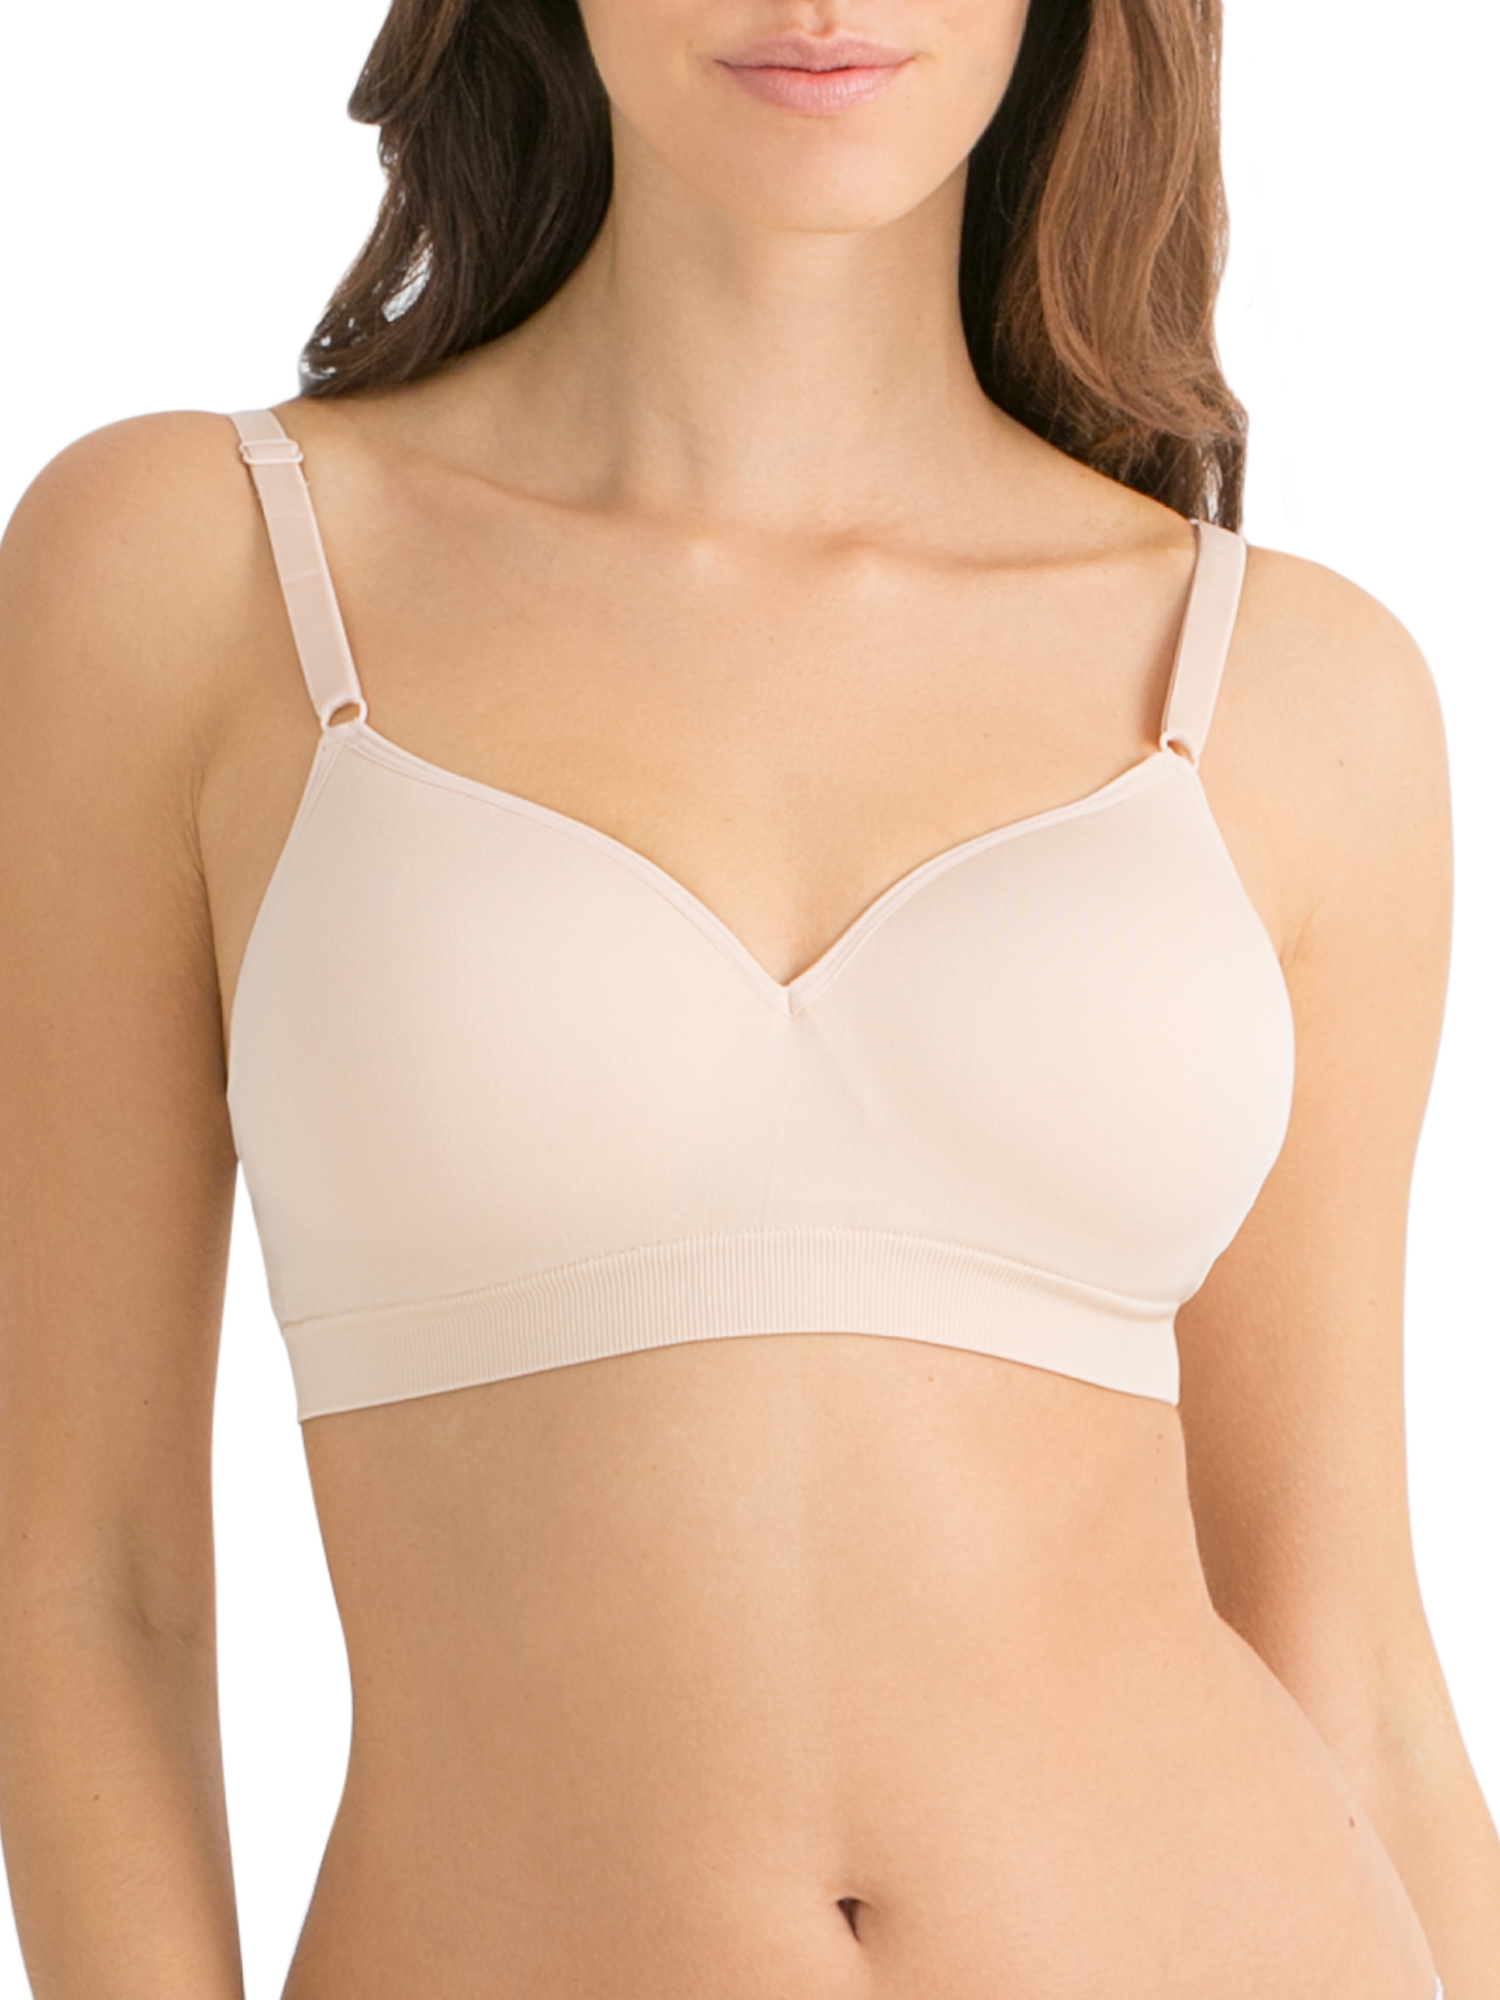 Fruit of the Loom Women's Seamless Wire Free Push Up with Lift Bra, Style FT640 - image 1 of 5